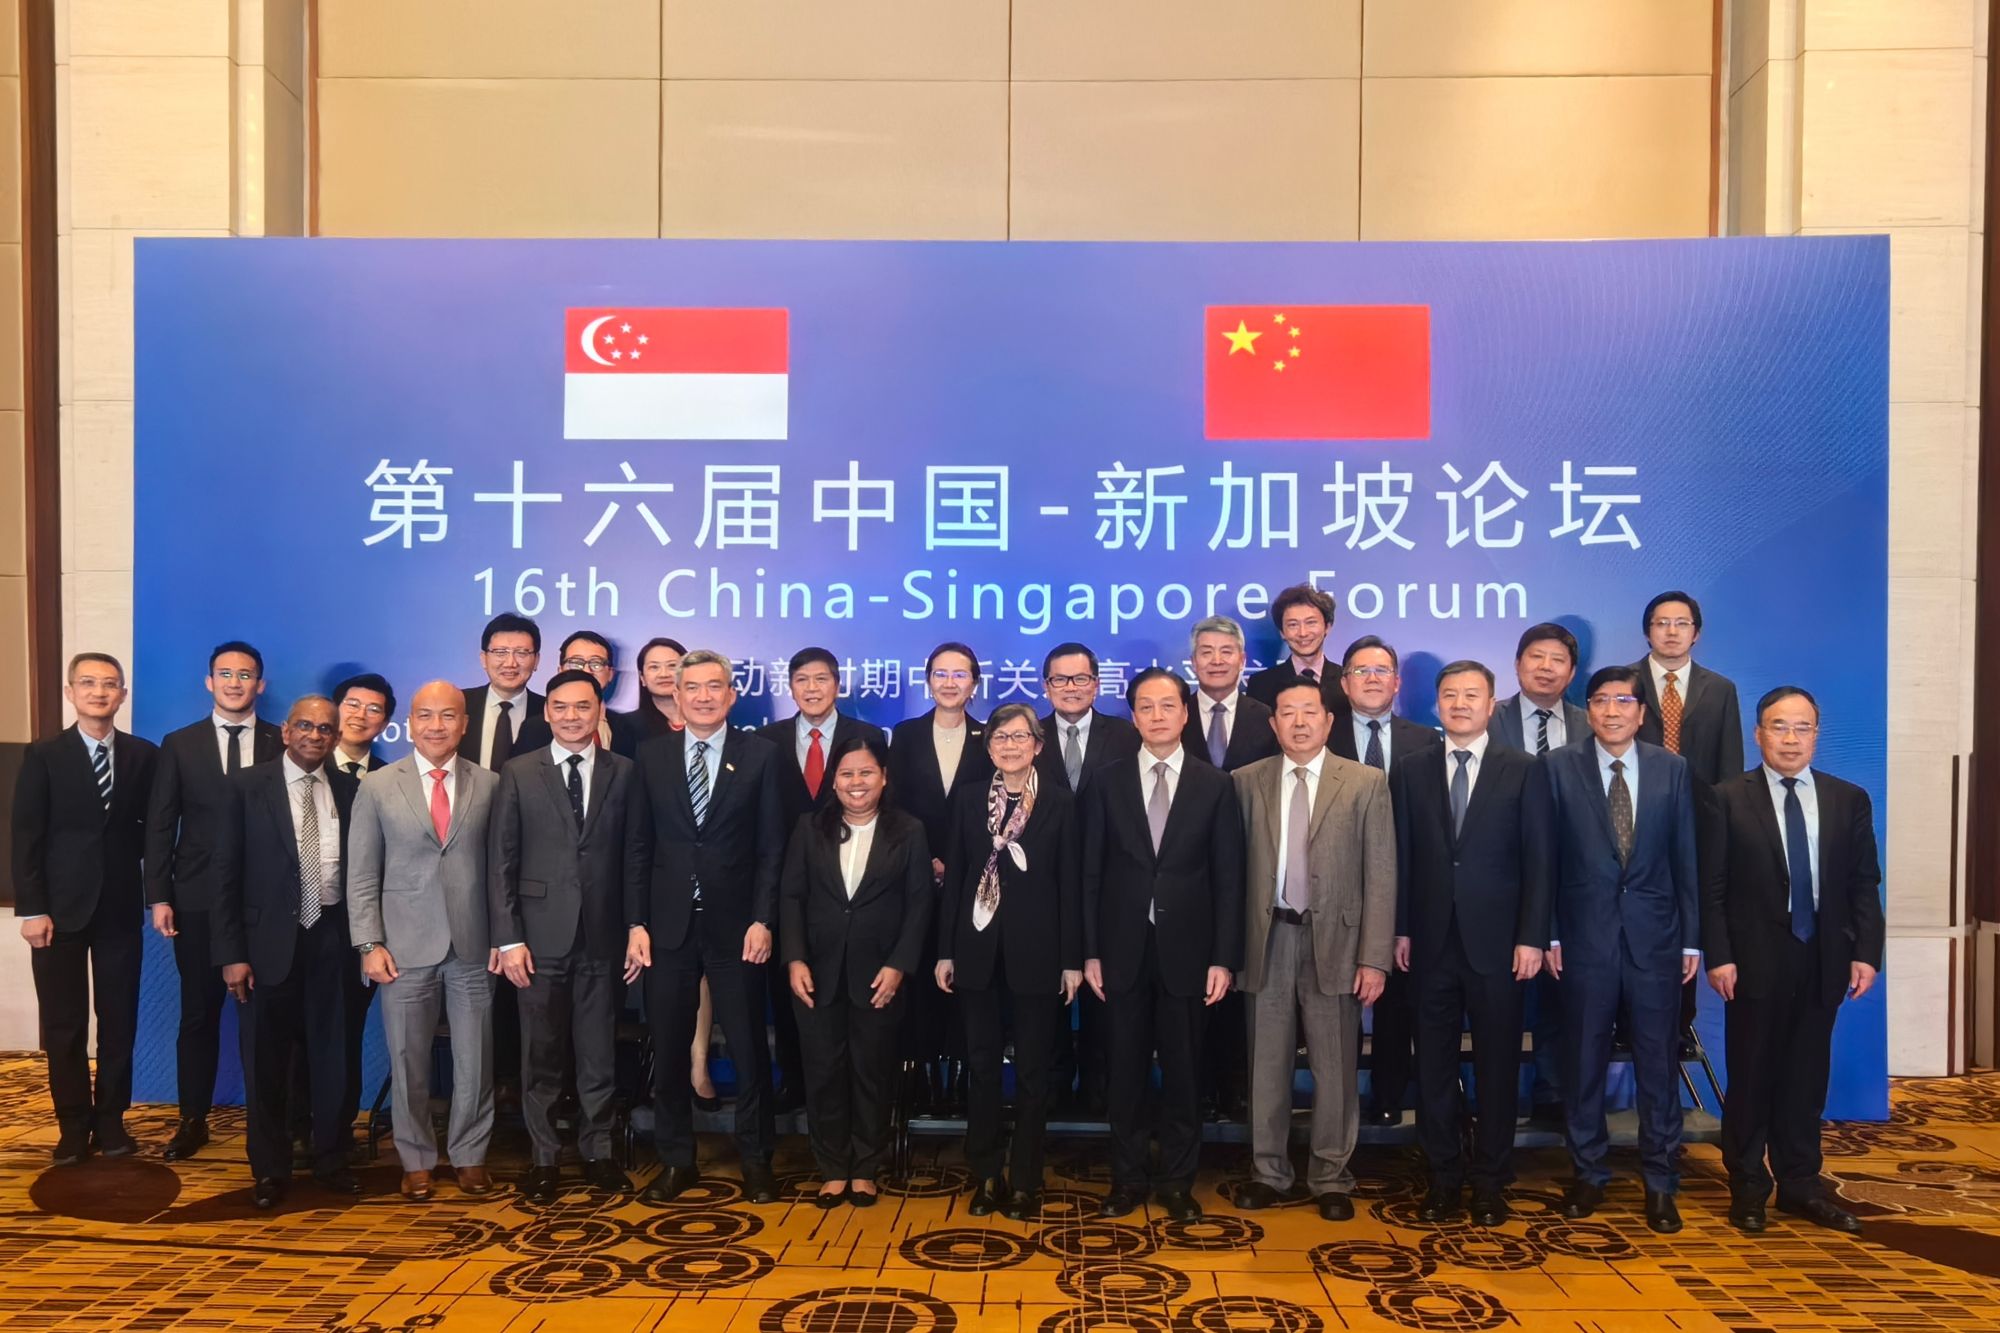 The 16th China-Singapore Forum Successfully Held